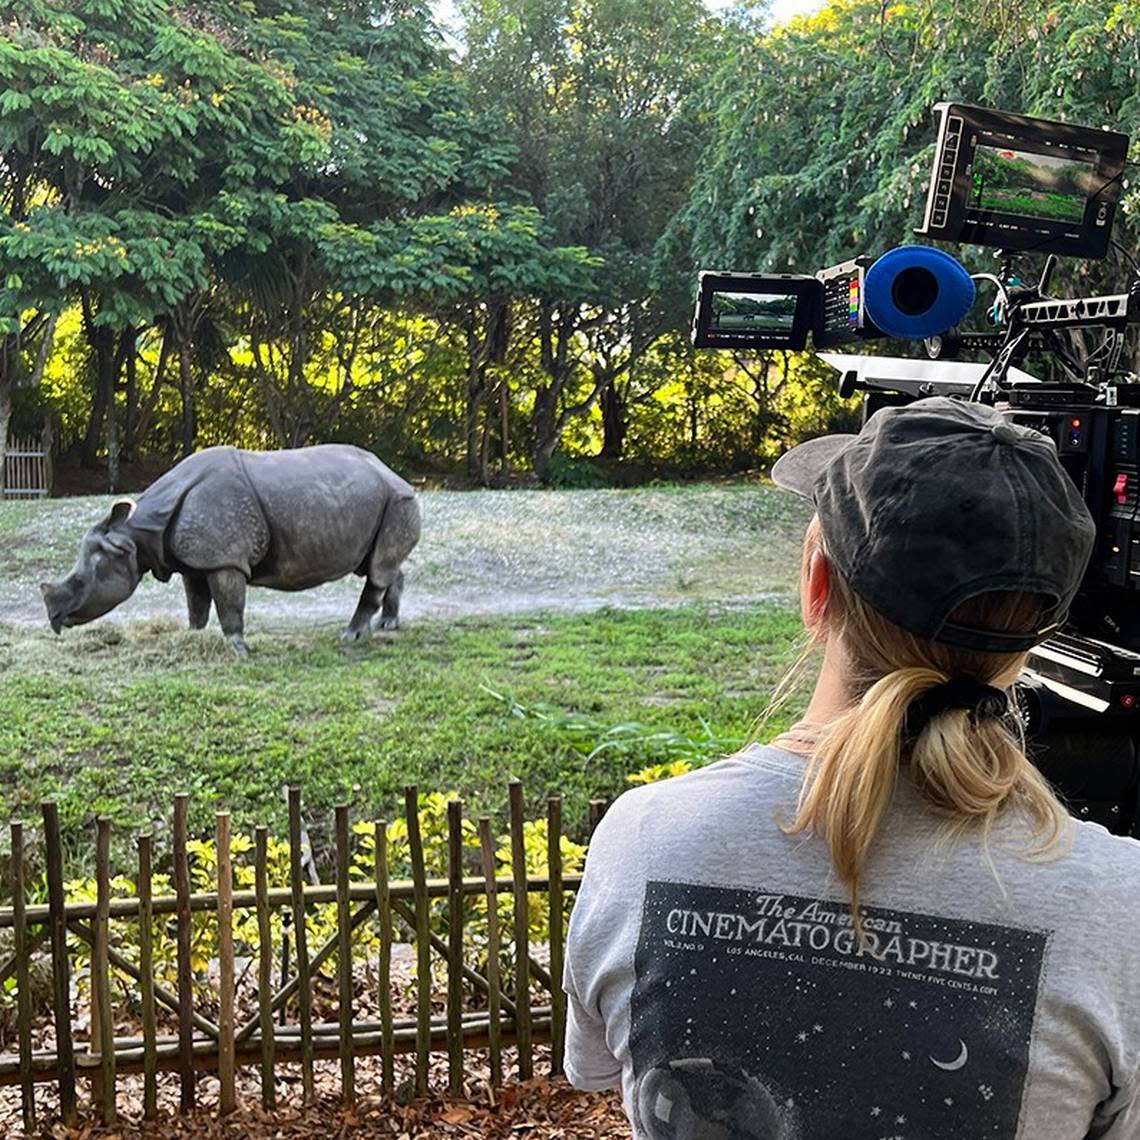 Akuti, a greater one-horned rhino at Zoo Miami, takes direction for her co-starring performance in a coming film tentatively titled, “Omni Loop.” The production team and director shot scenes featuring the rhino at Zoo Miami in Kendall on Sept. 6, 2022.